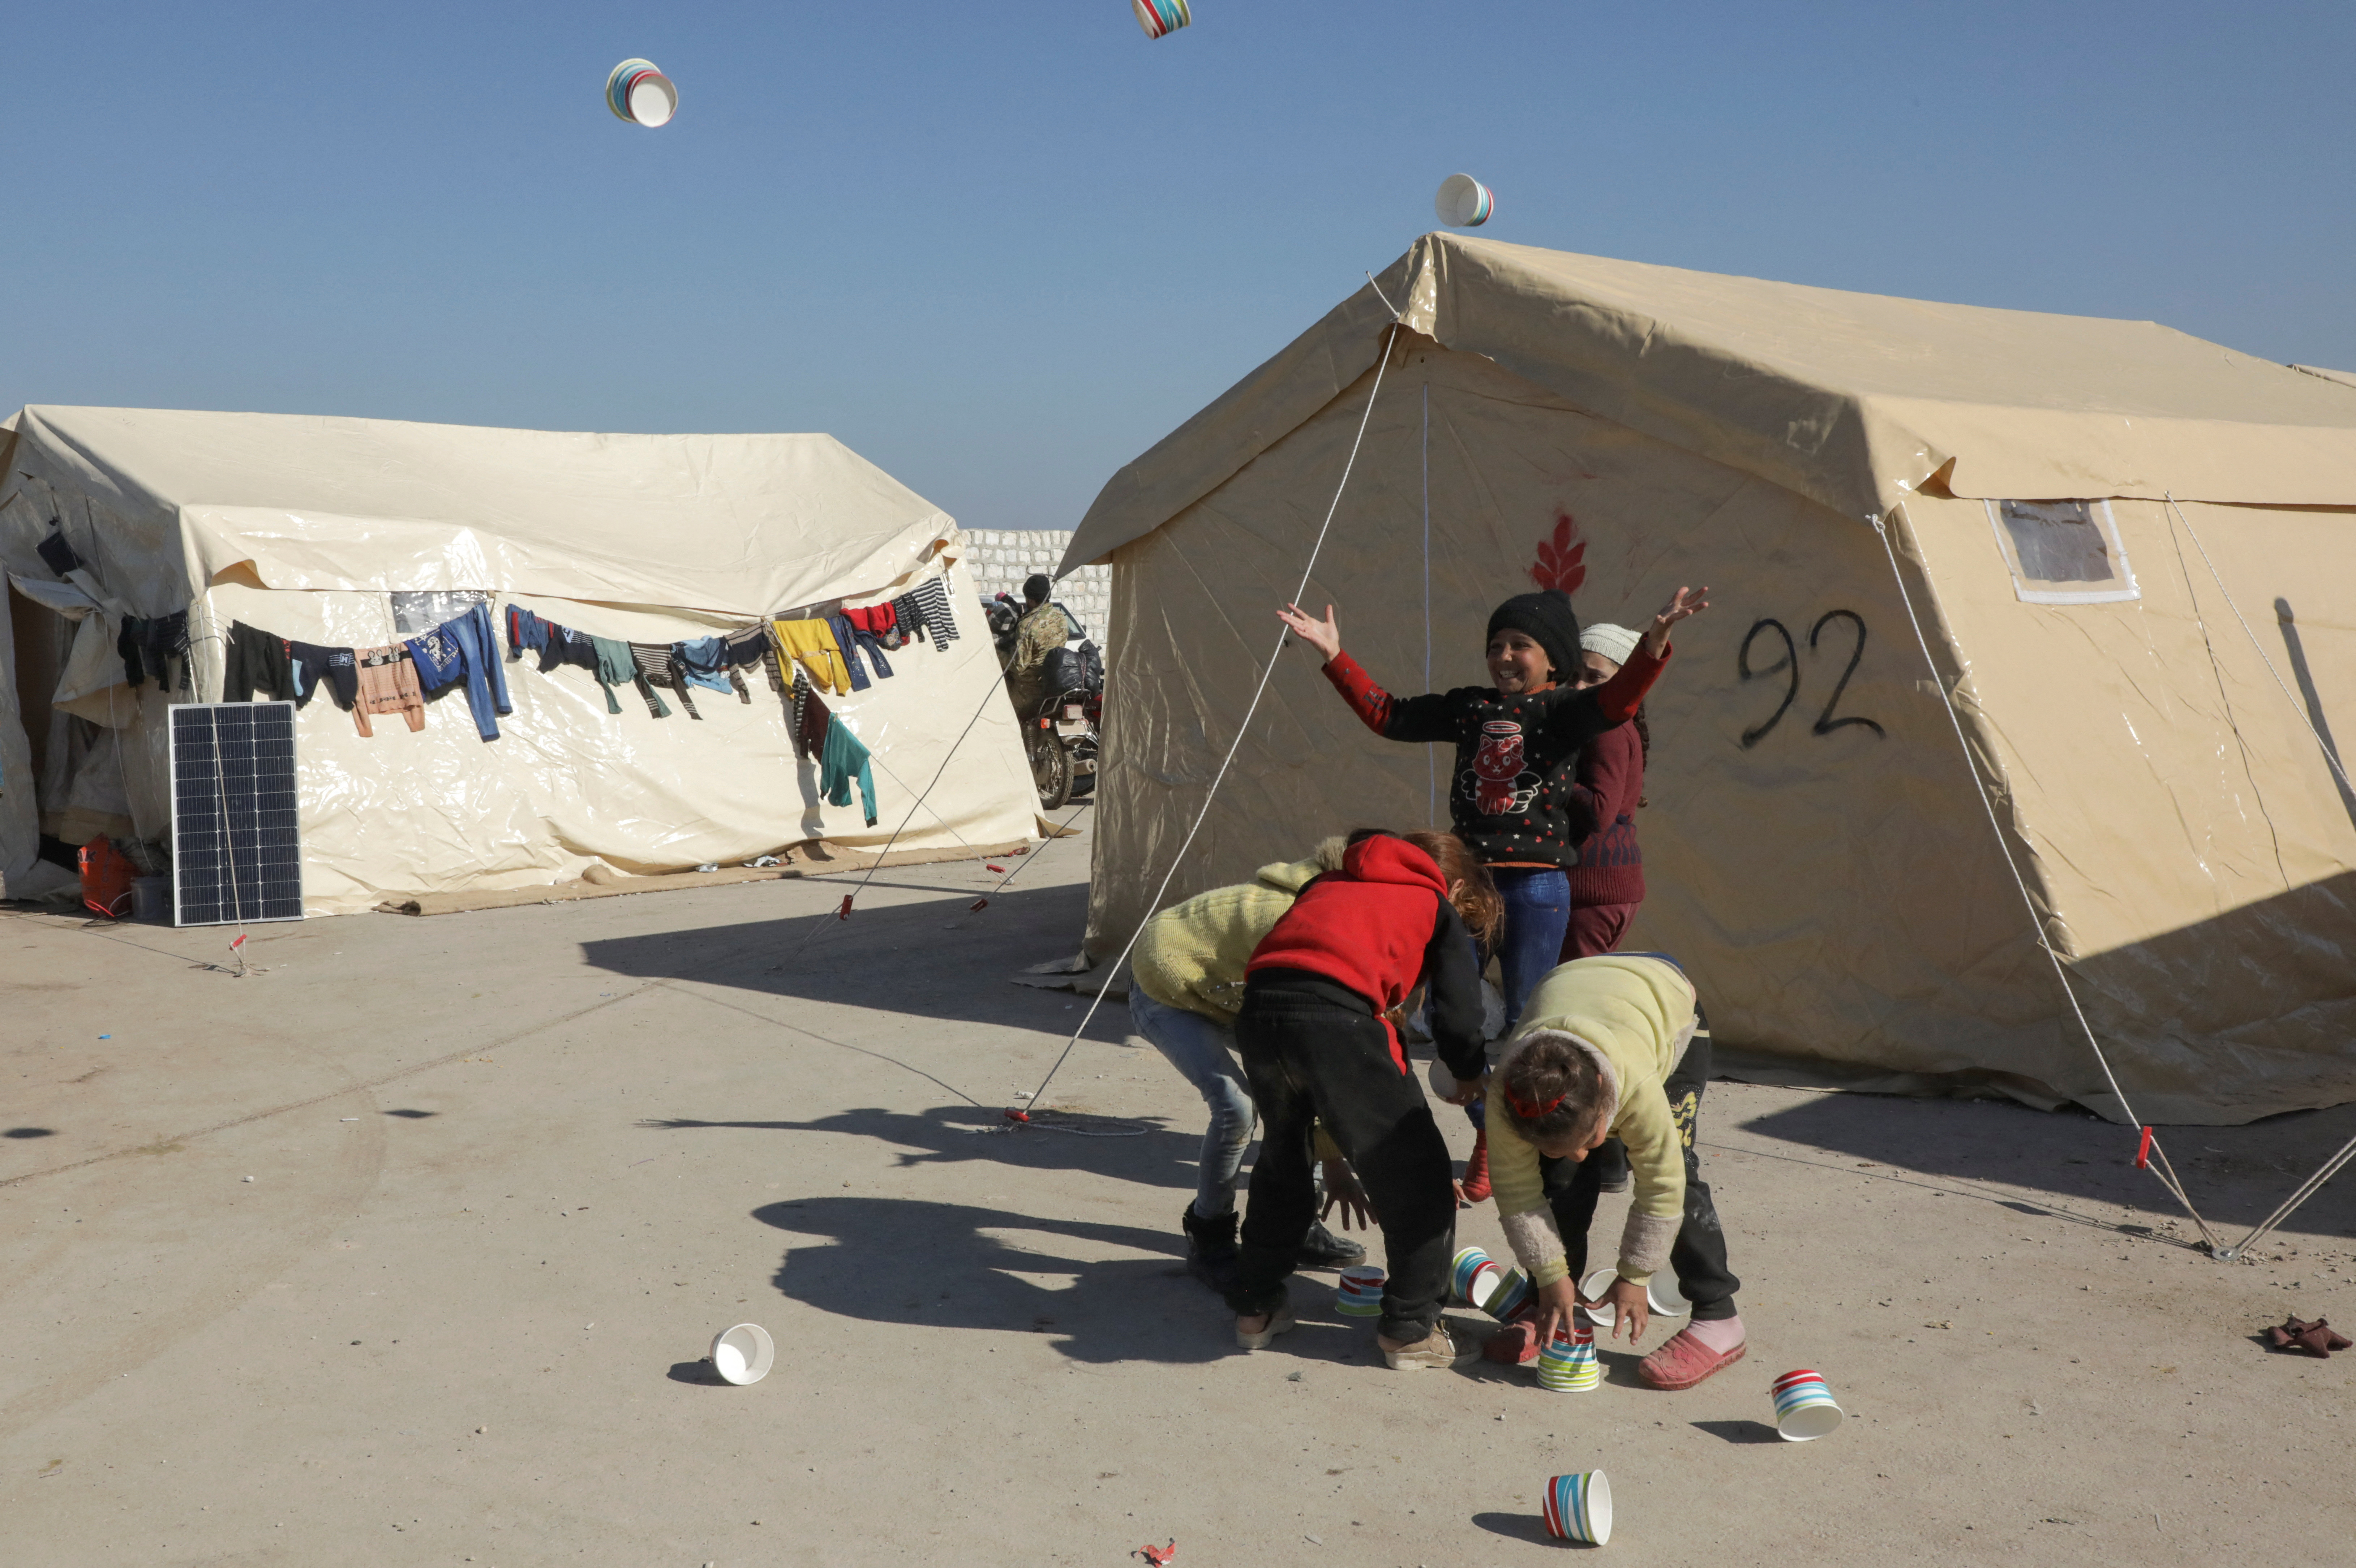 Children play near tents at a camp for earthquake survivors, on the outskirts of rebel-held town of Jandaris